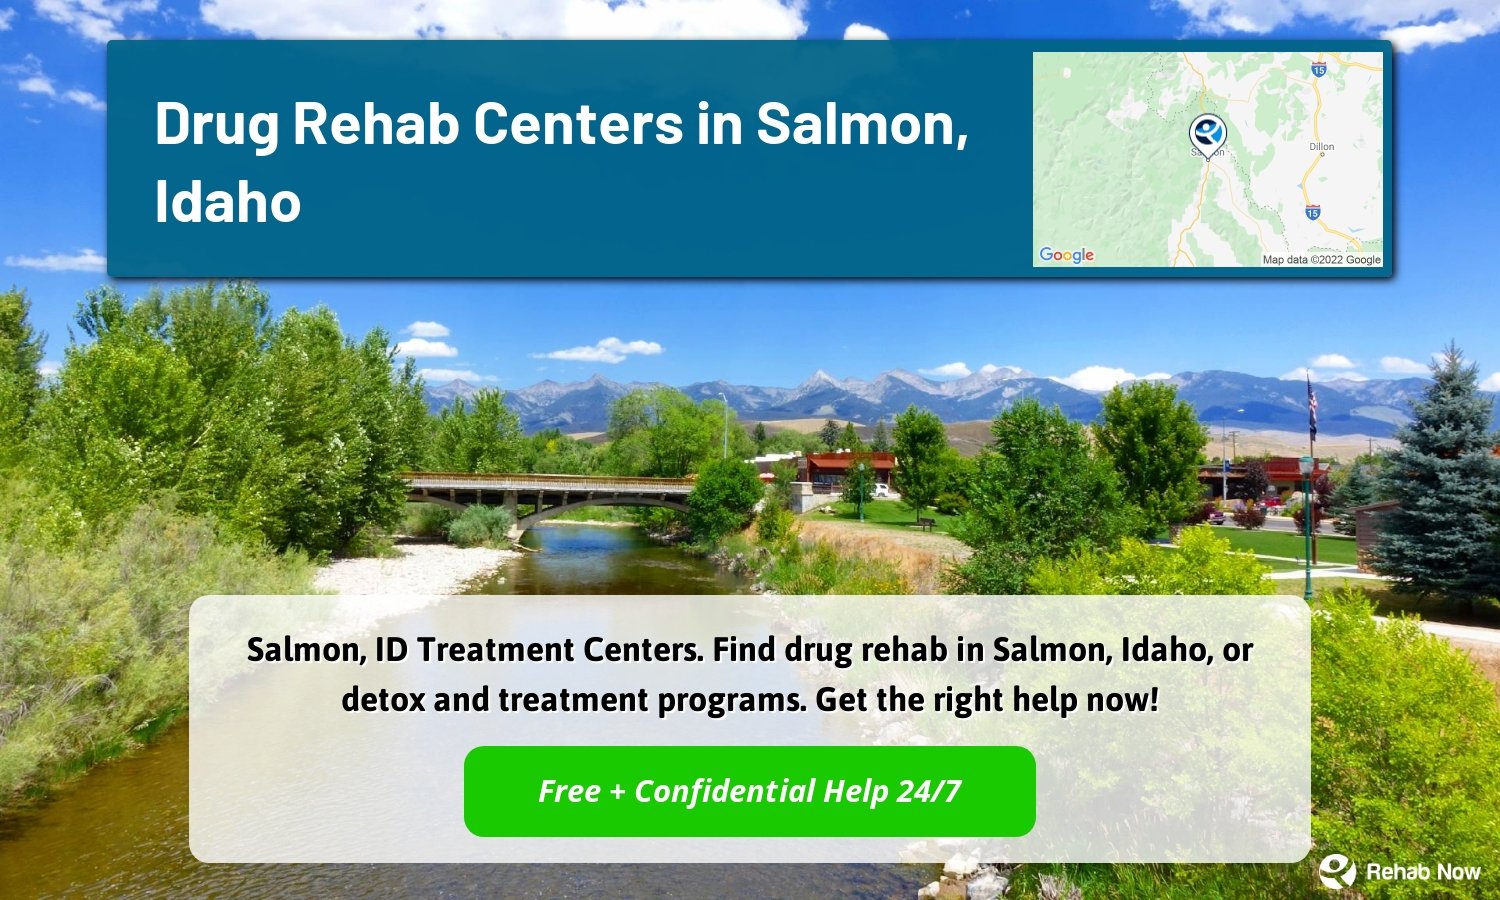 Salmon, ID Treatment Centers. Find drug rehab in Salmon, Idaho, or detox and treatment programs. Get the right help now!